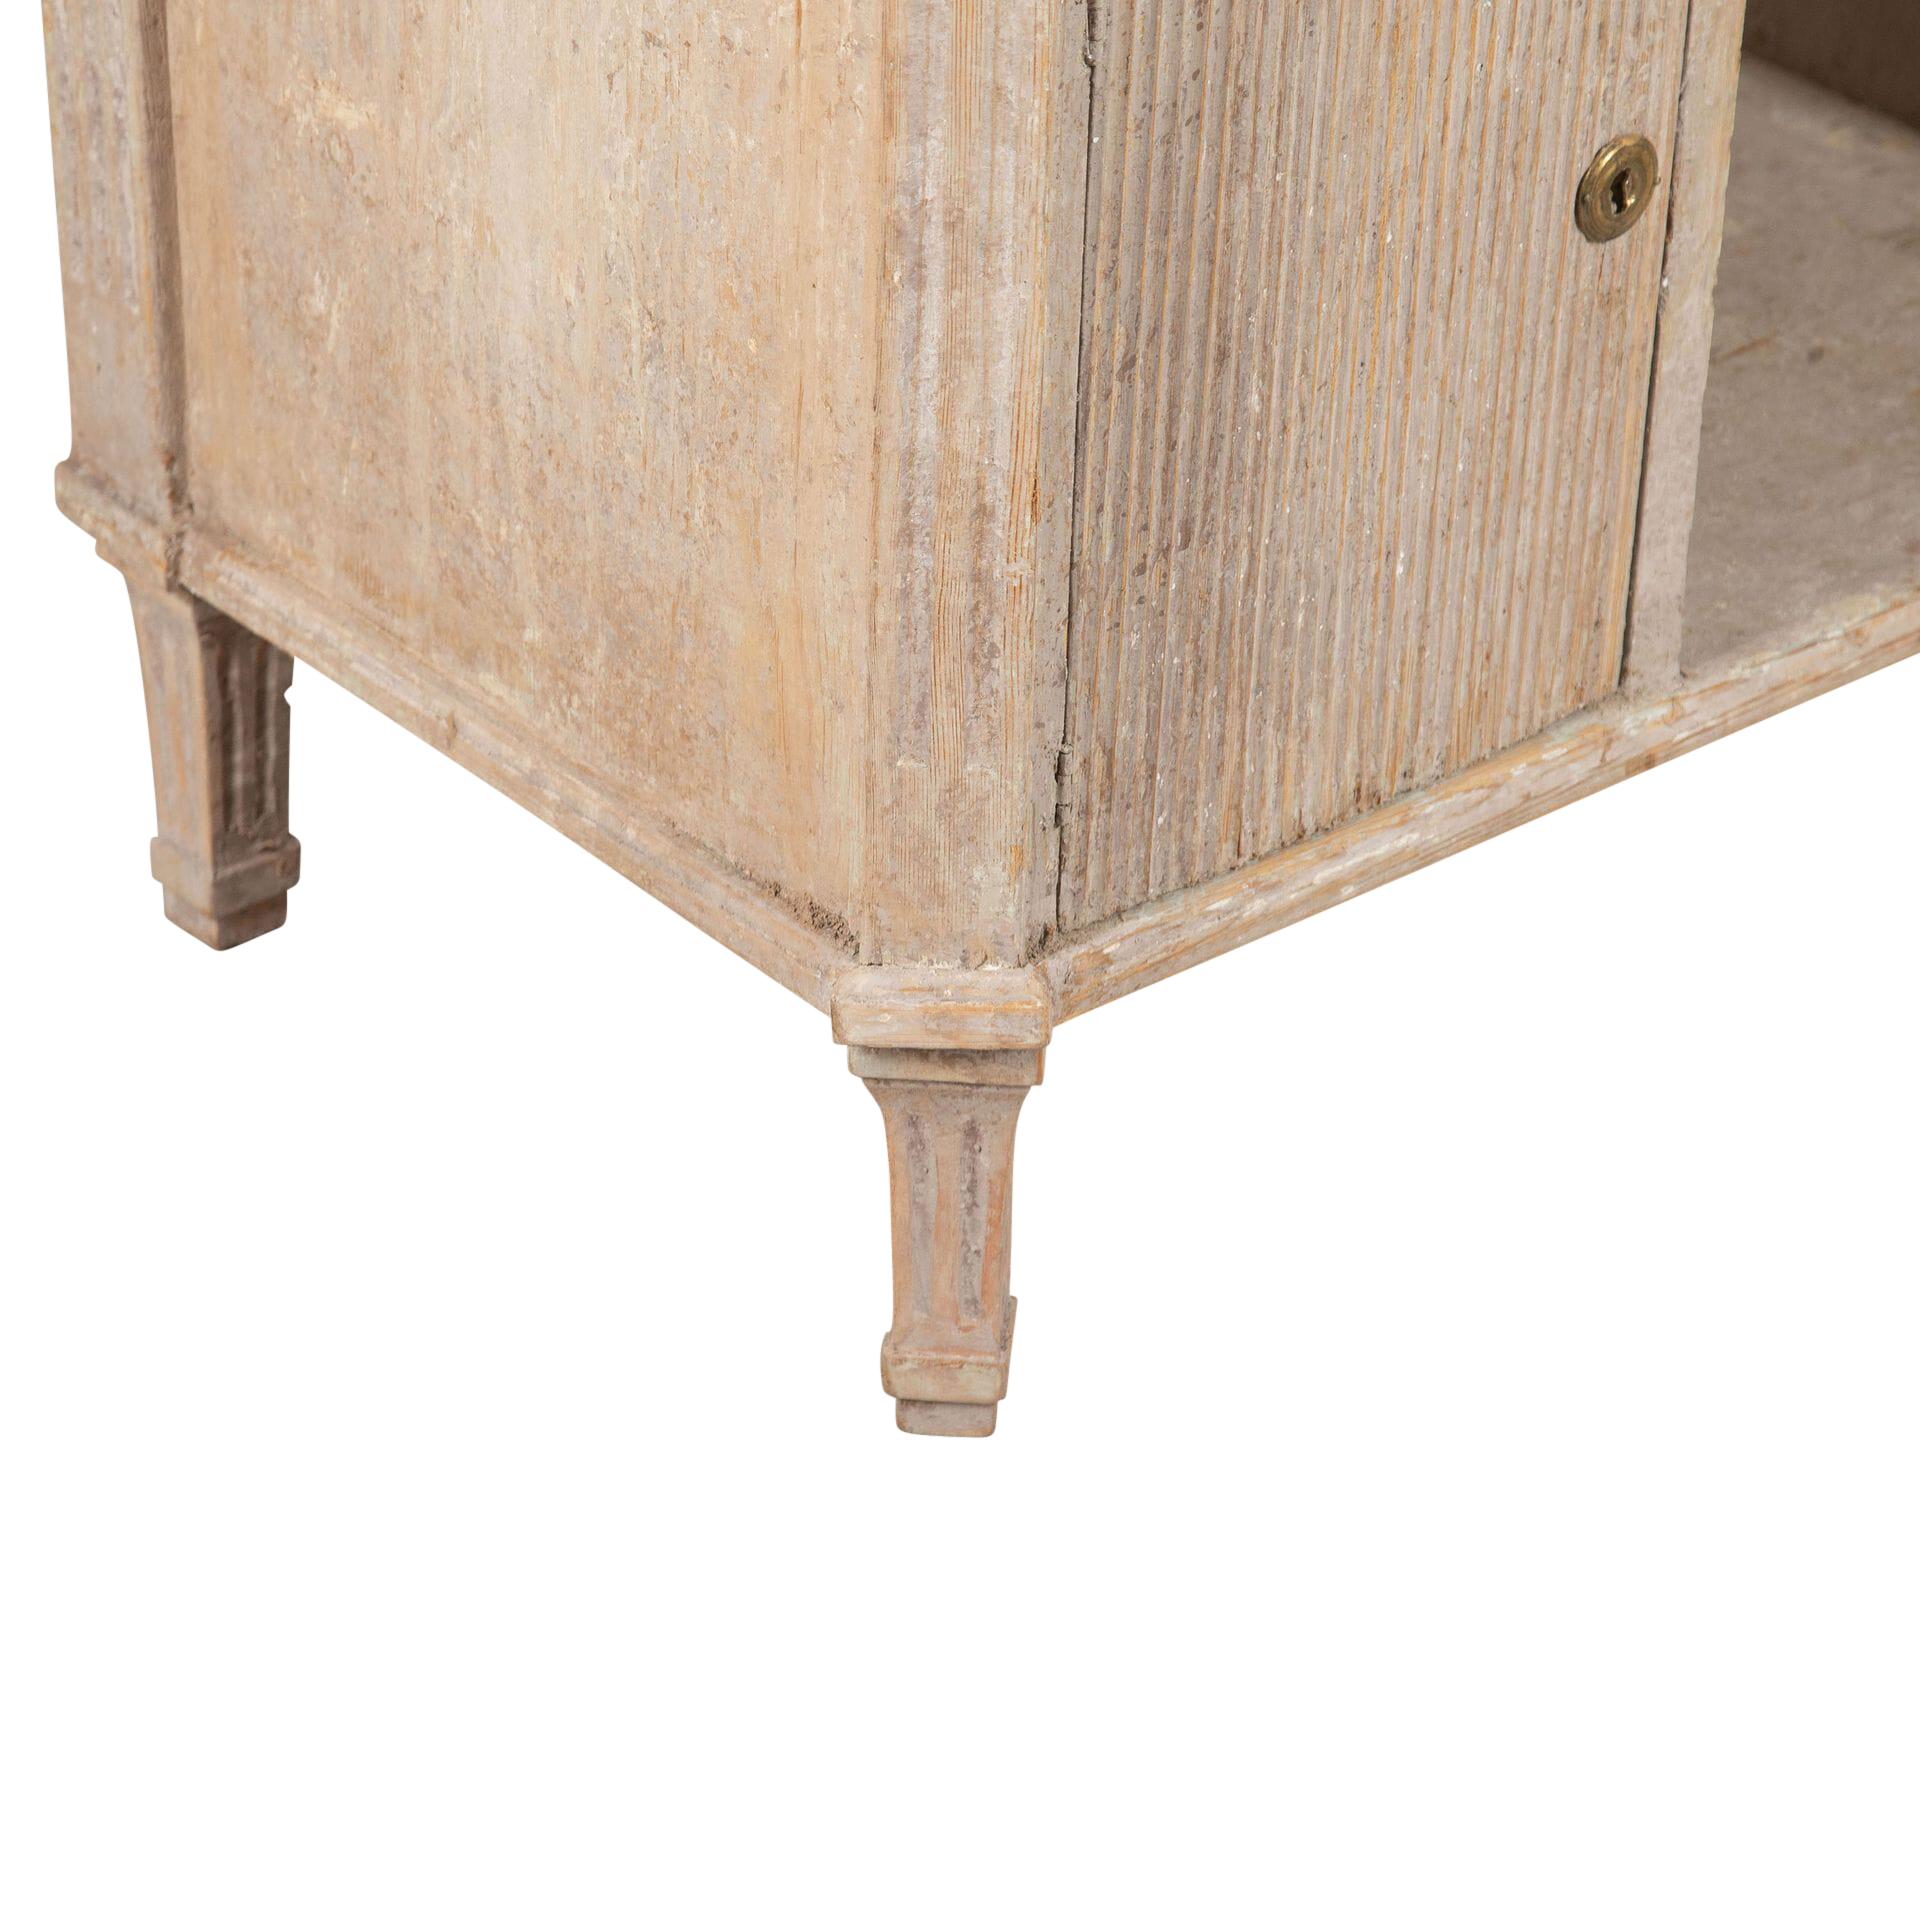 19th Century Swedish Gustavian Sideboard In Good Condition For Sale In Tetbury, Gloucestershire